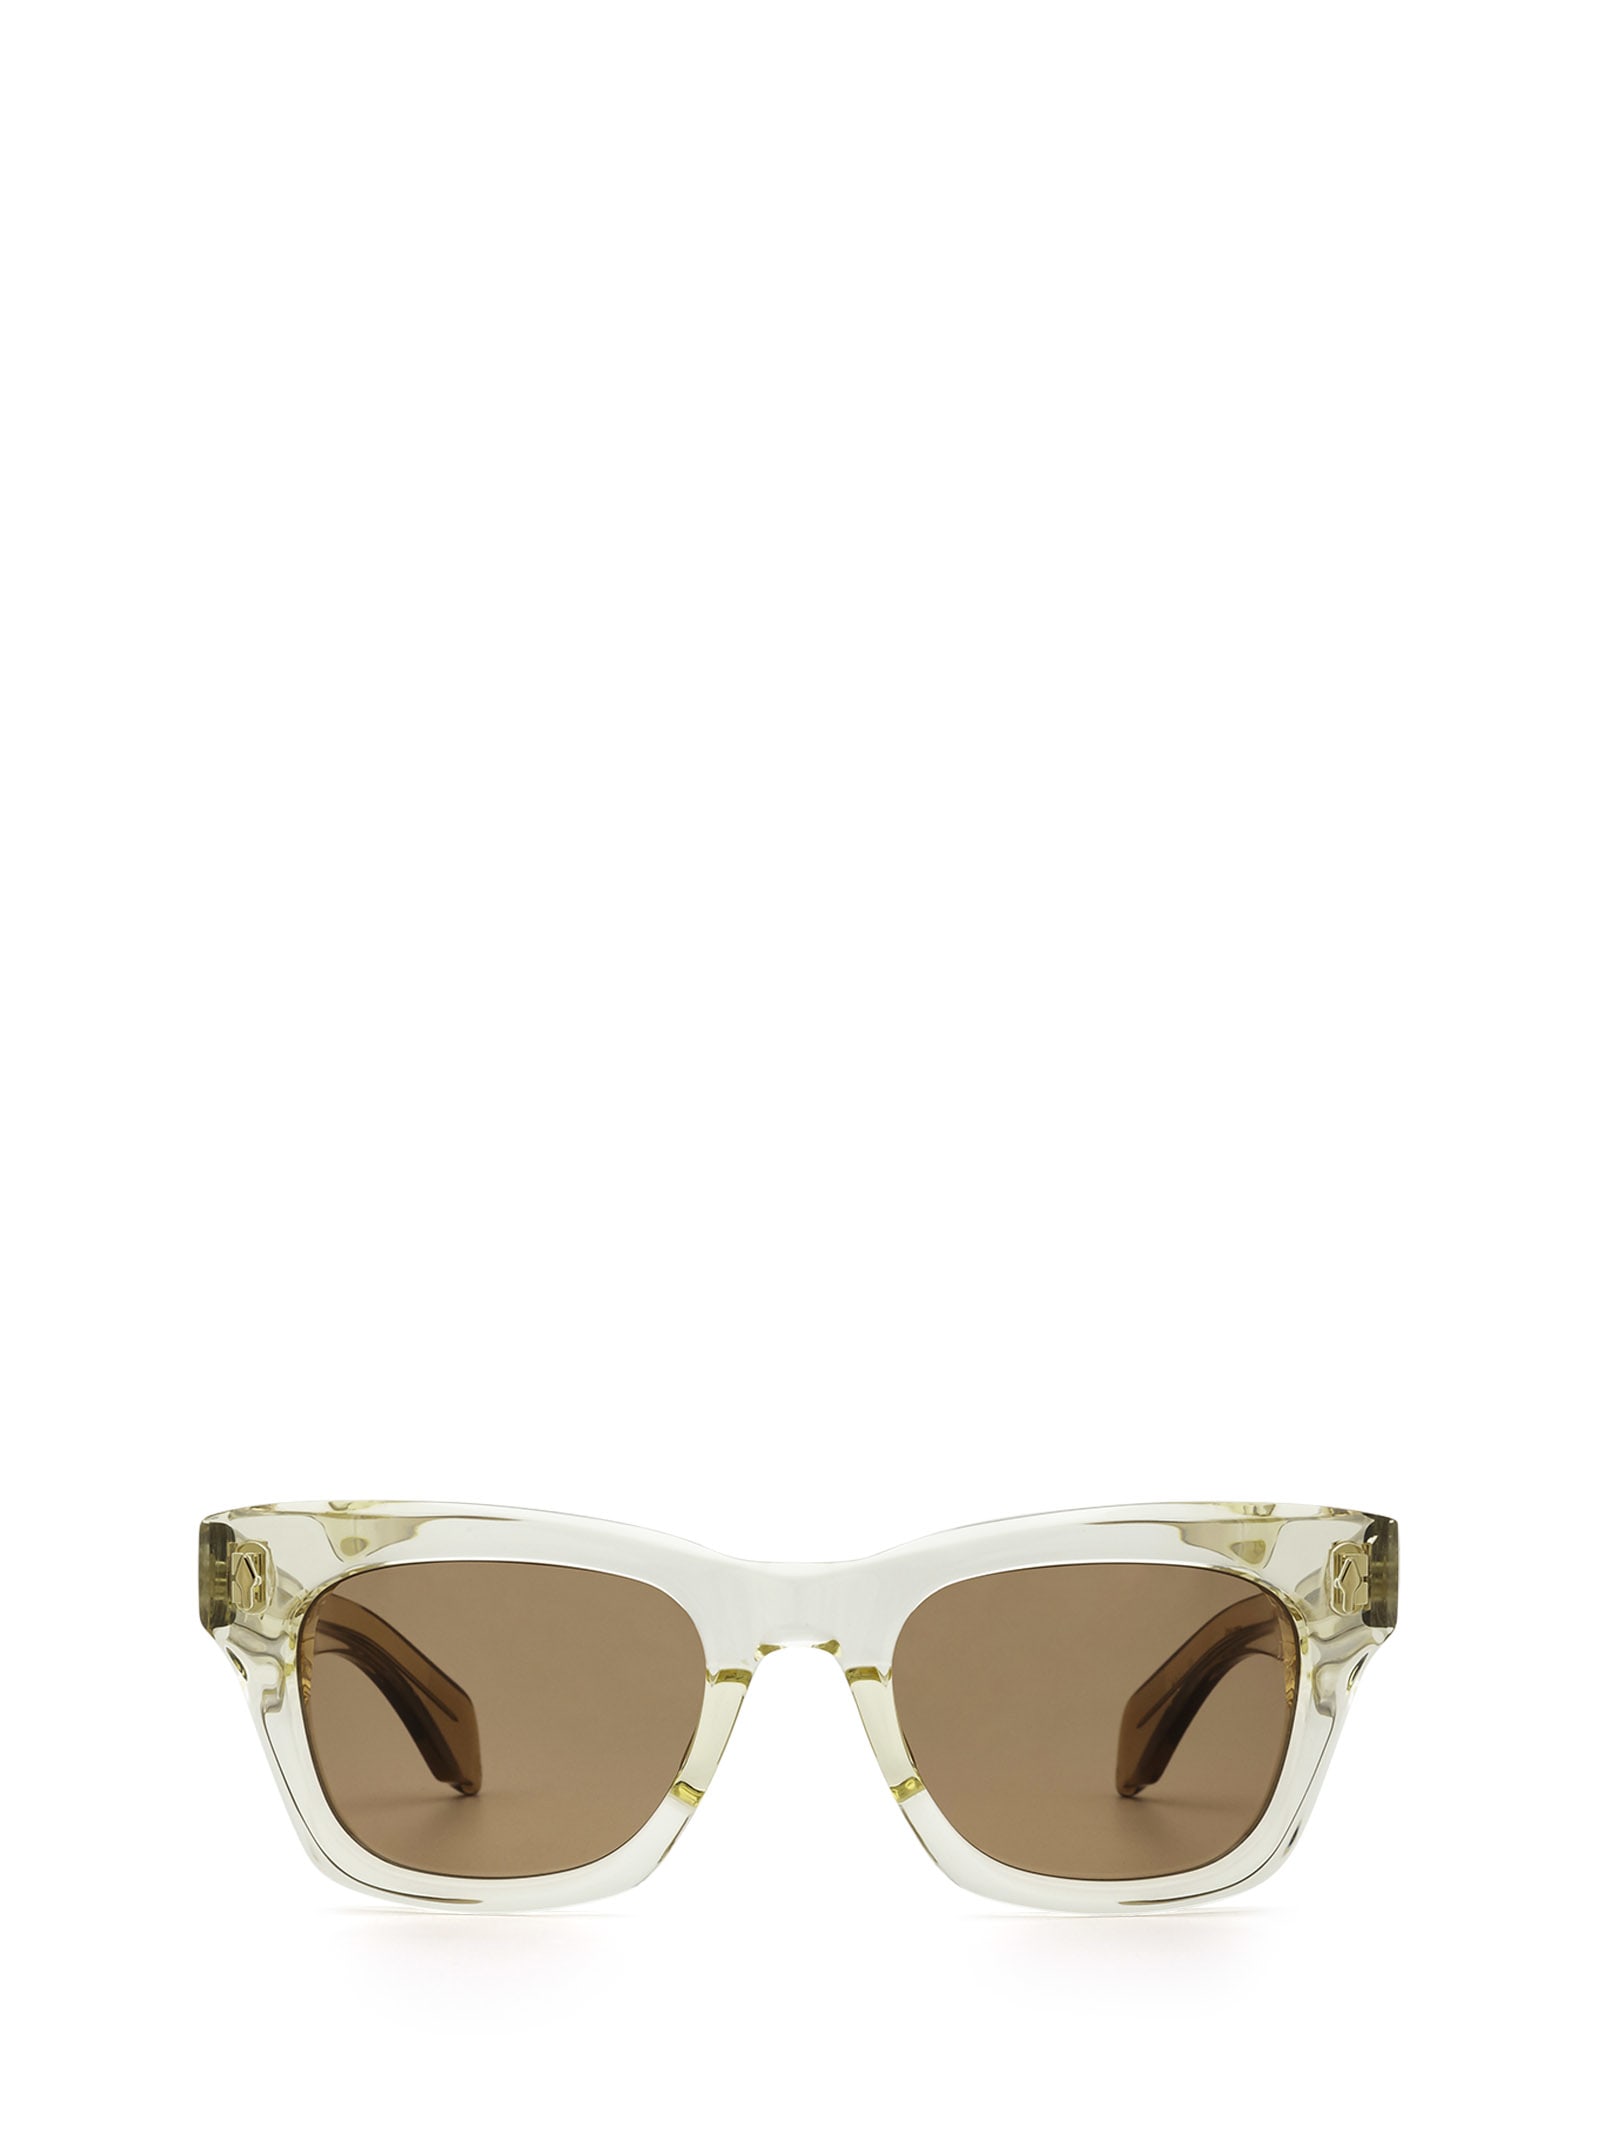 Jacques Marie Mage Jacques Marie Mage Dealan Shironeri Sunglasses